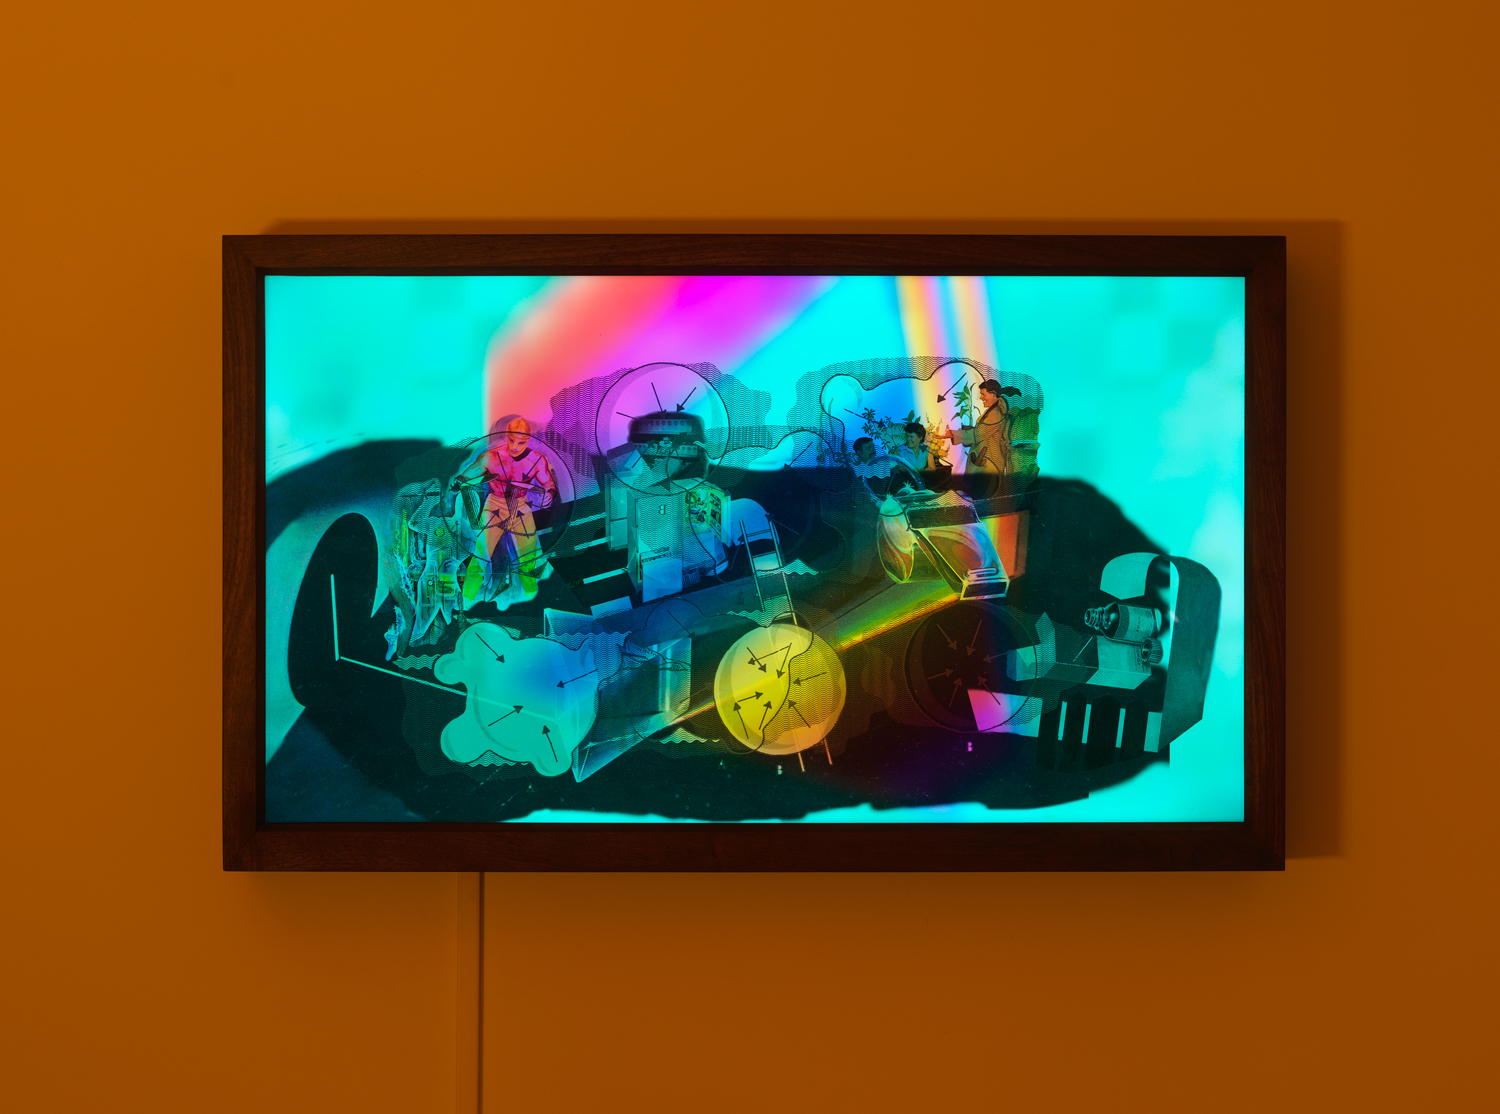 Jibade-Khalil Huffman, A Void, 2020, Transparency in lightbox with flatscreen monitor, looping video, 28.19h x 46.25w x 5.63d in.